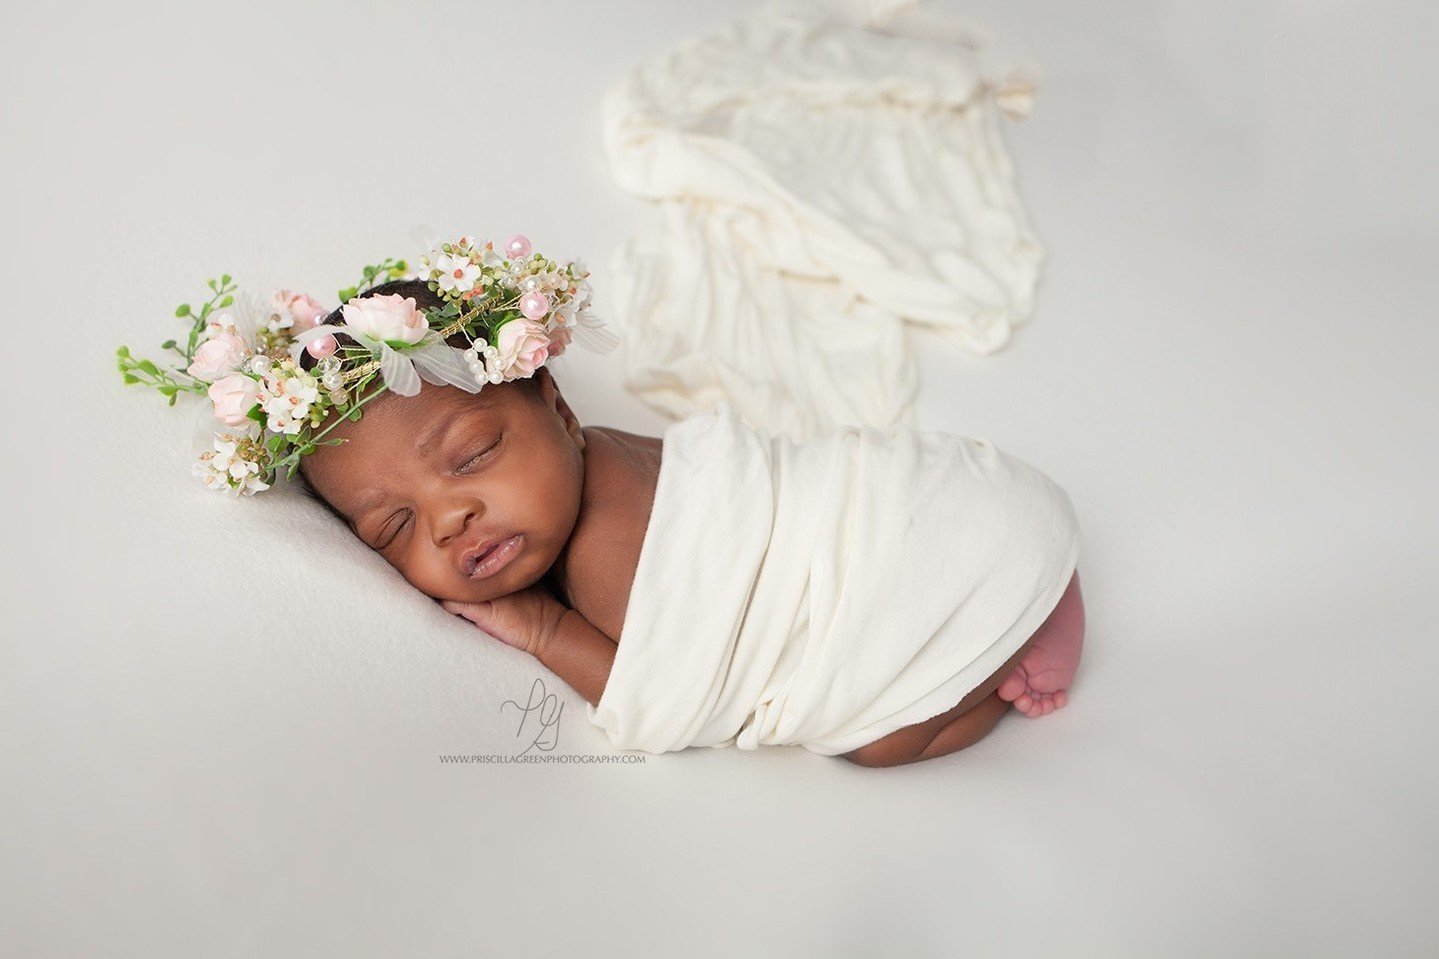 📸 Capturing priceless moments since 2013! 🌟 Ready to welcome your little bundle of joy into the world? 🤱🏼 Look no further! Book your newborn photoshoot with Priscilla Green Photography and let our 12 years of professional experience do the magic 